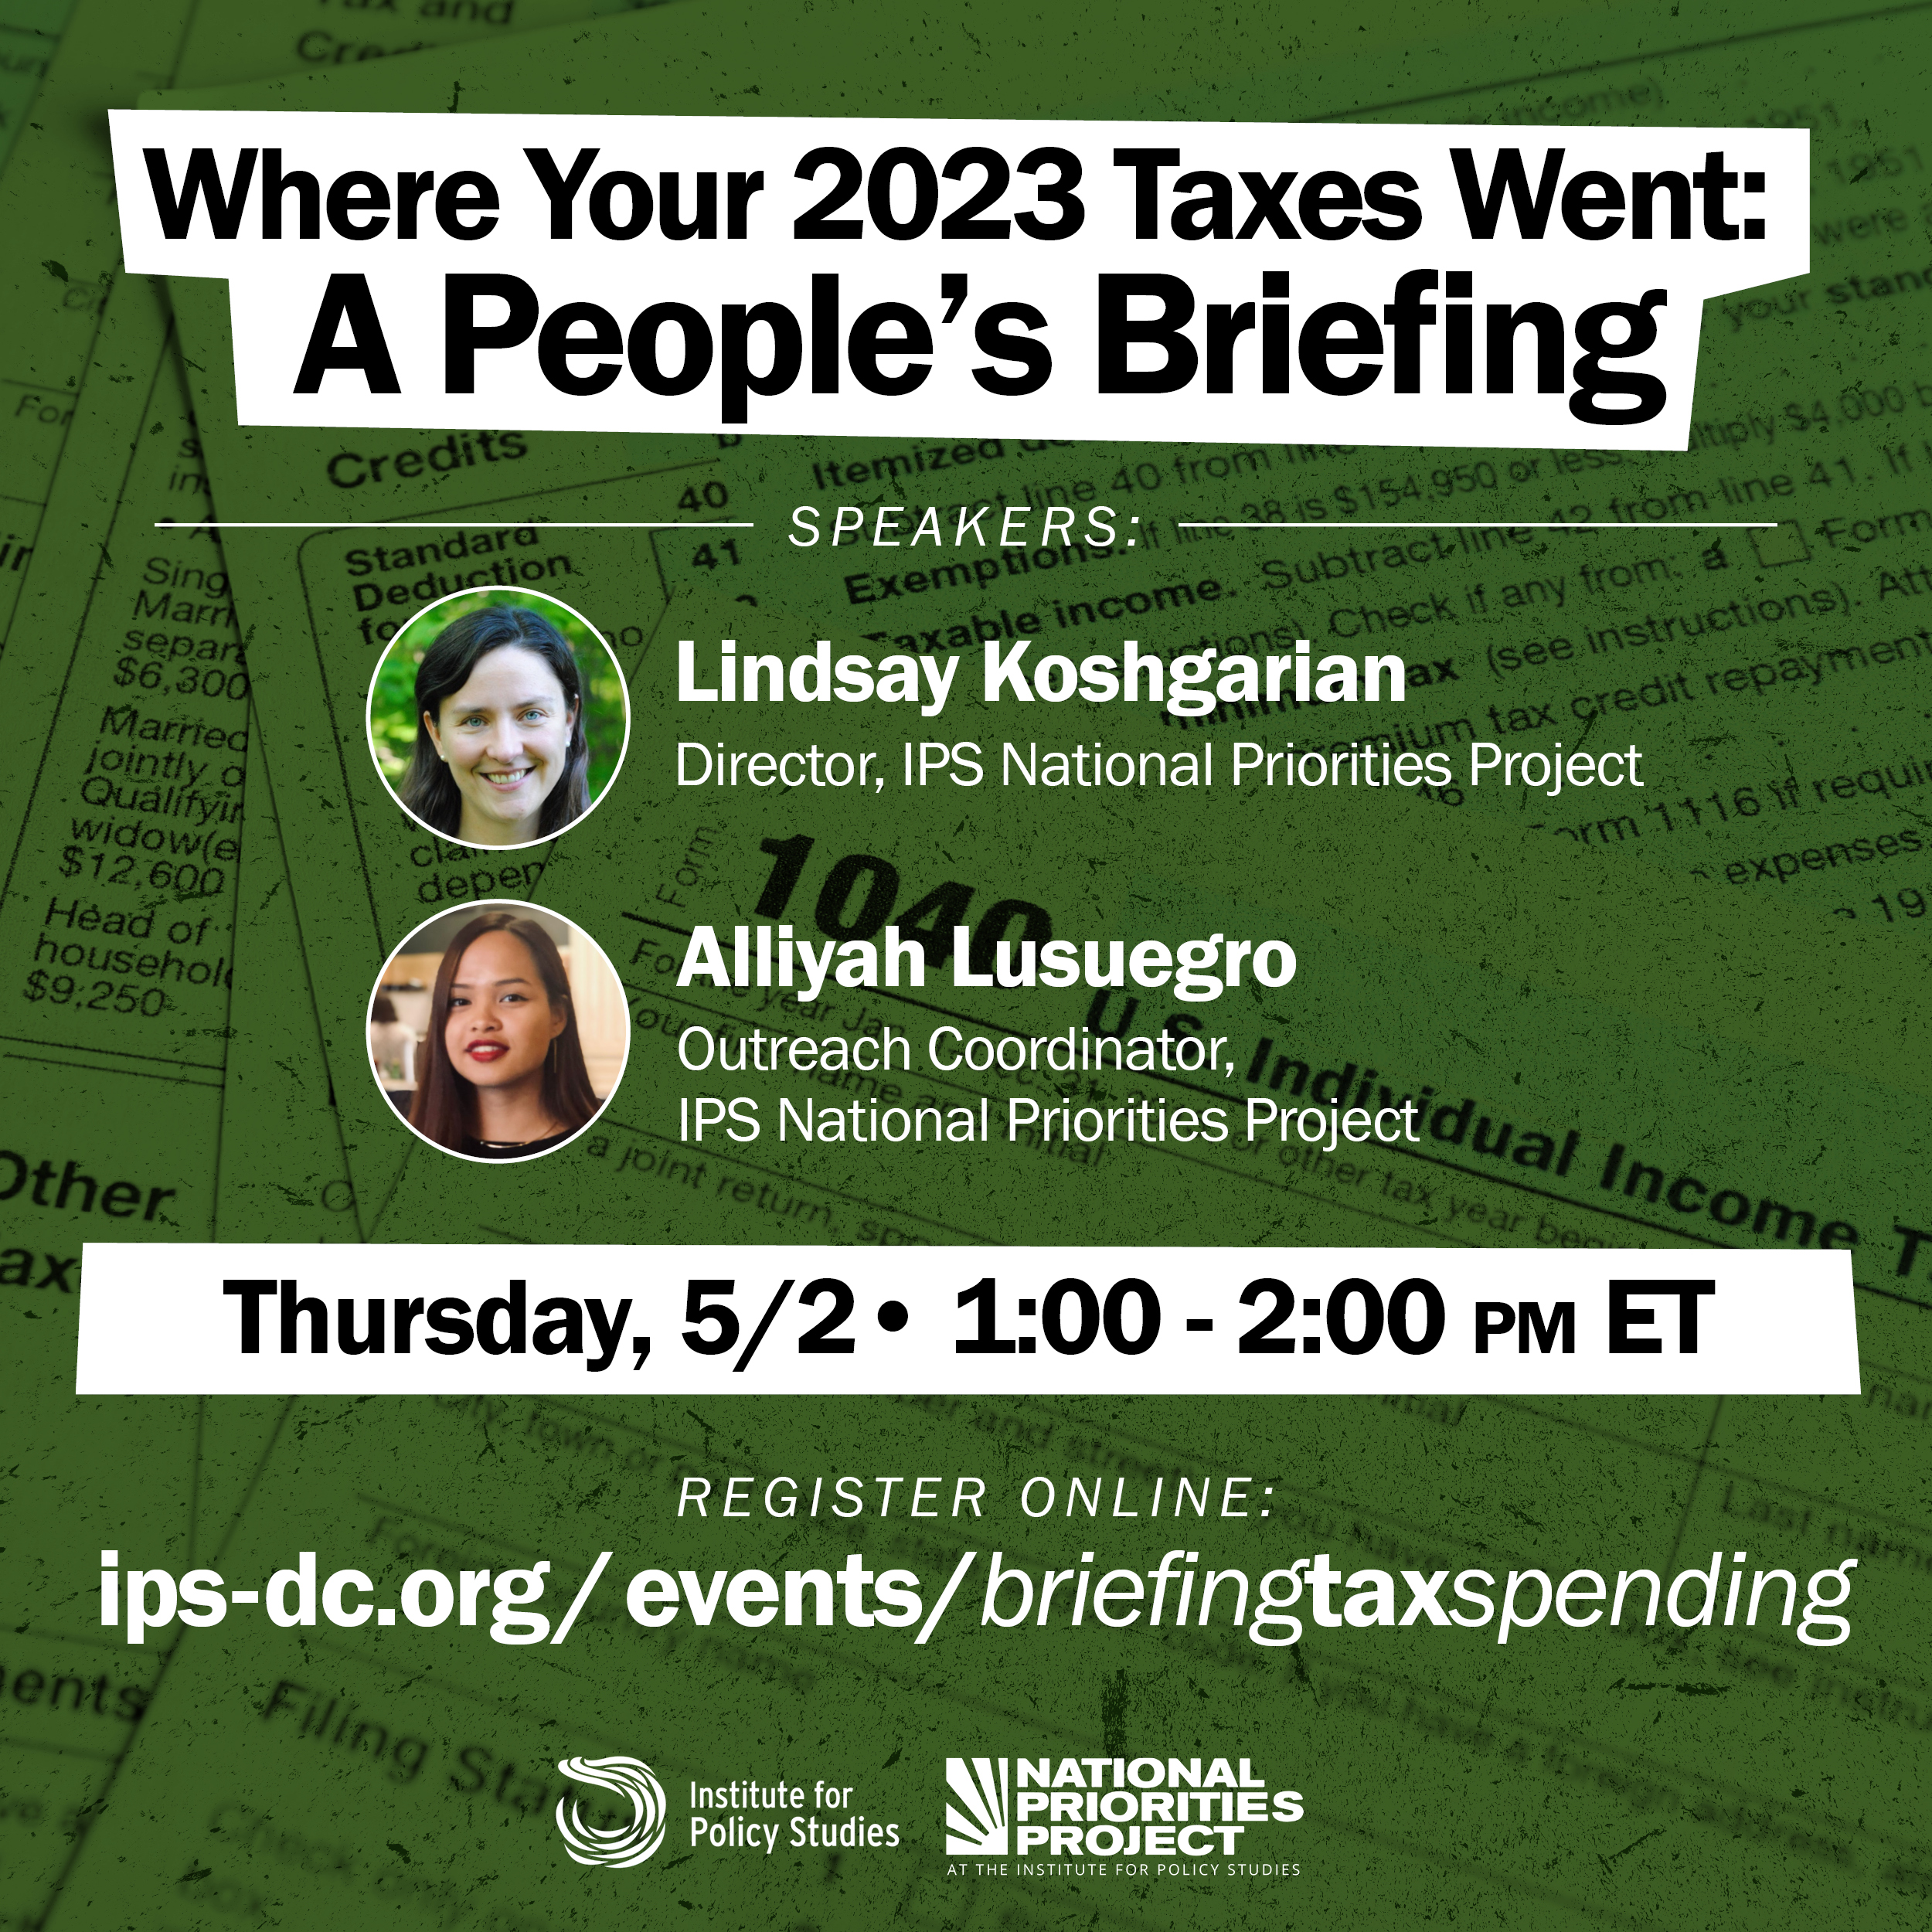 Where Your 2023 Taxes Went: A People’s Briefing